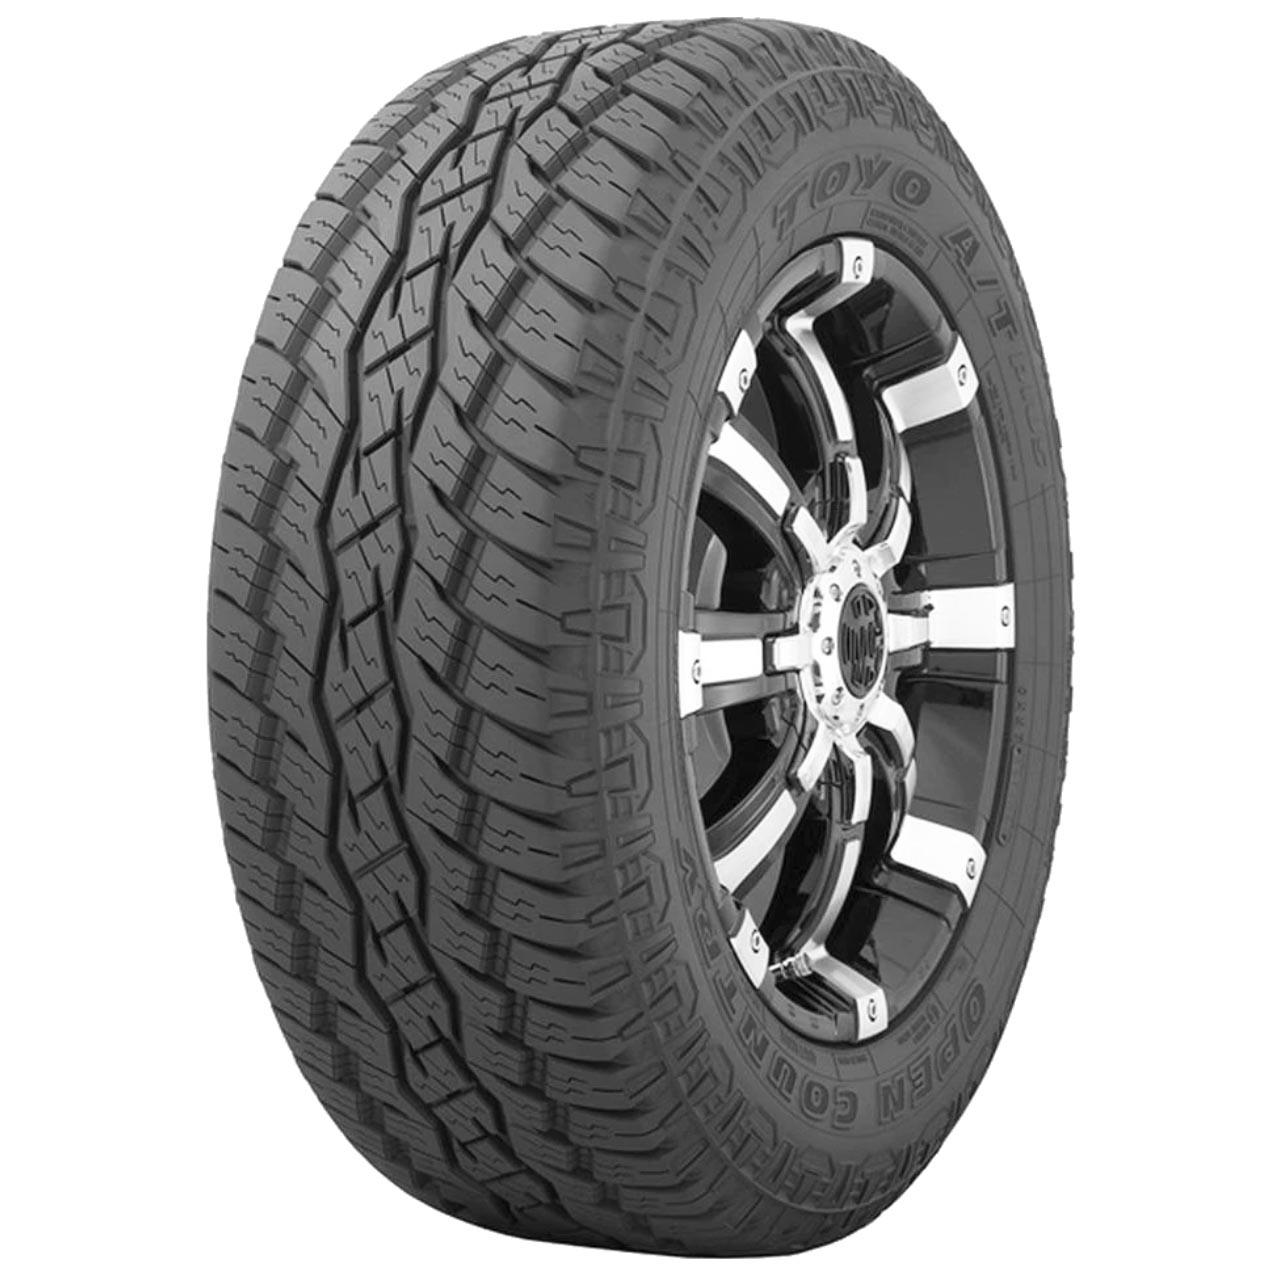 Toyo Open Country AT Plus 225/70R16 103H